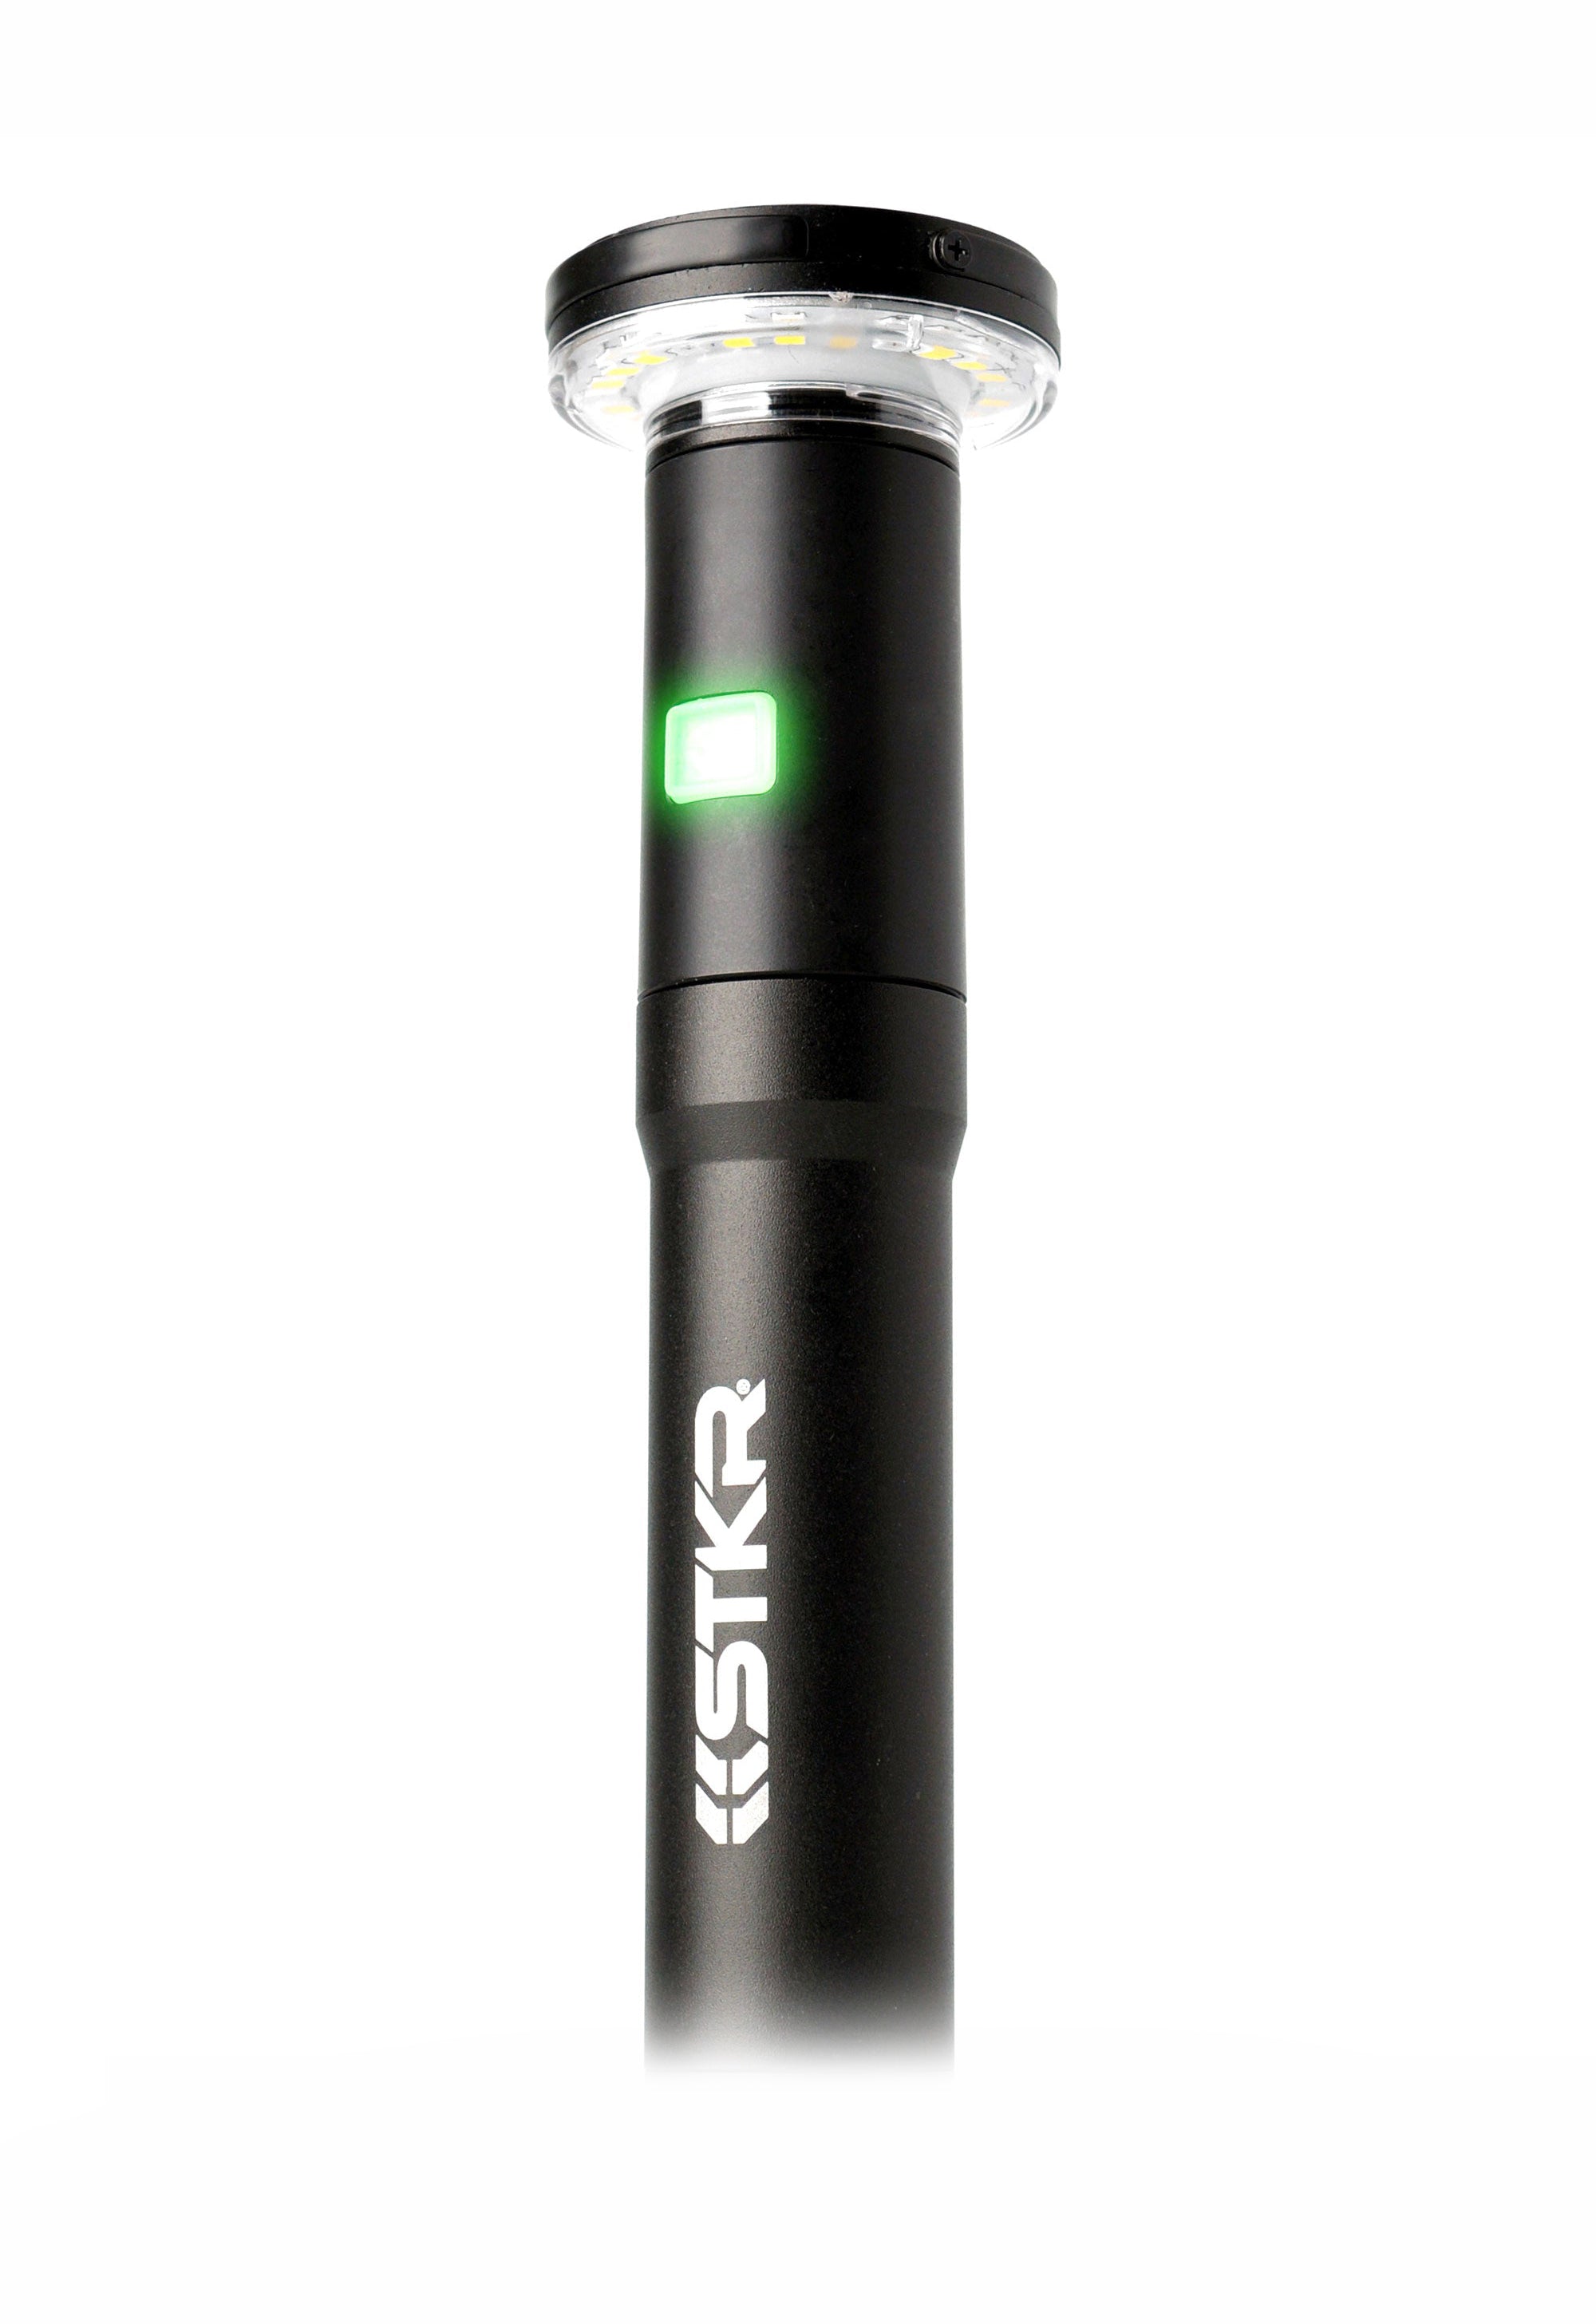 Battery level indicator | FLi Telescoping Light by STKR Concepts